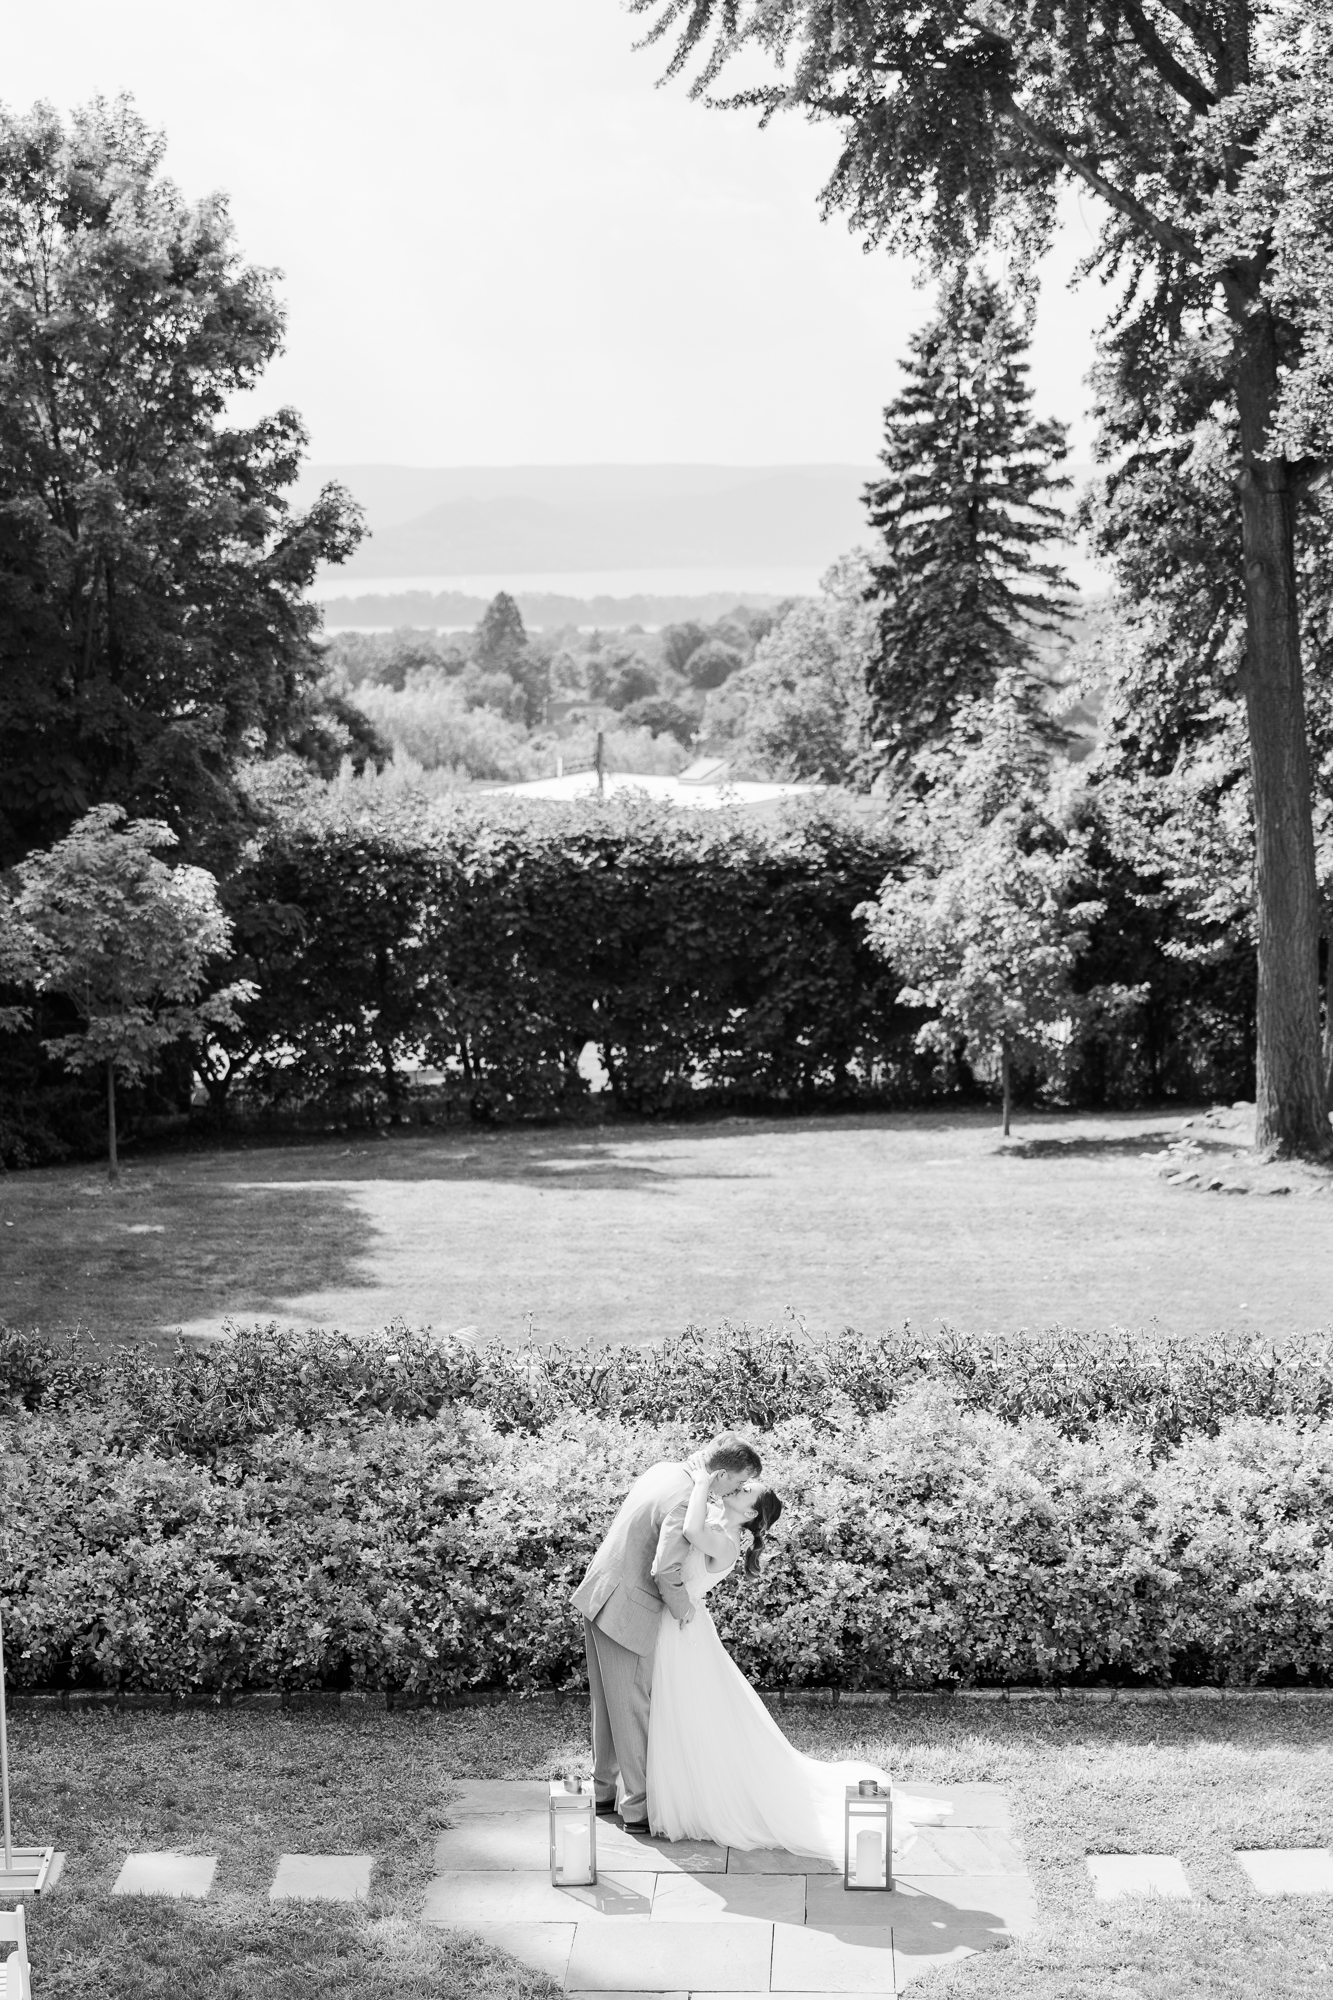 Authentic Wedding at Briarcliff Manor in Summertime